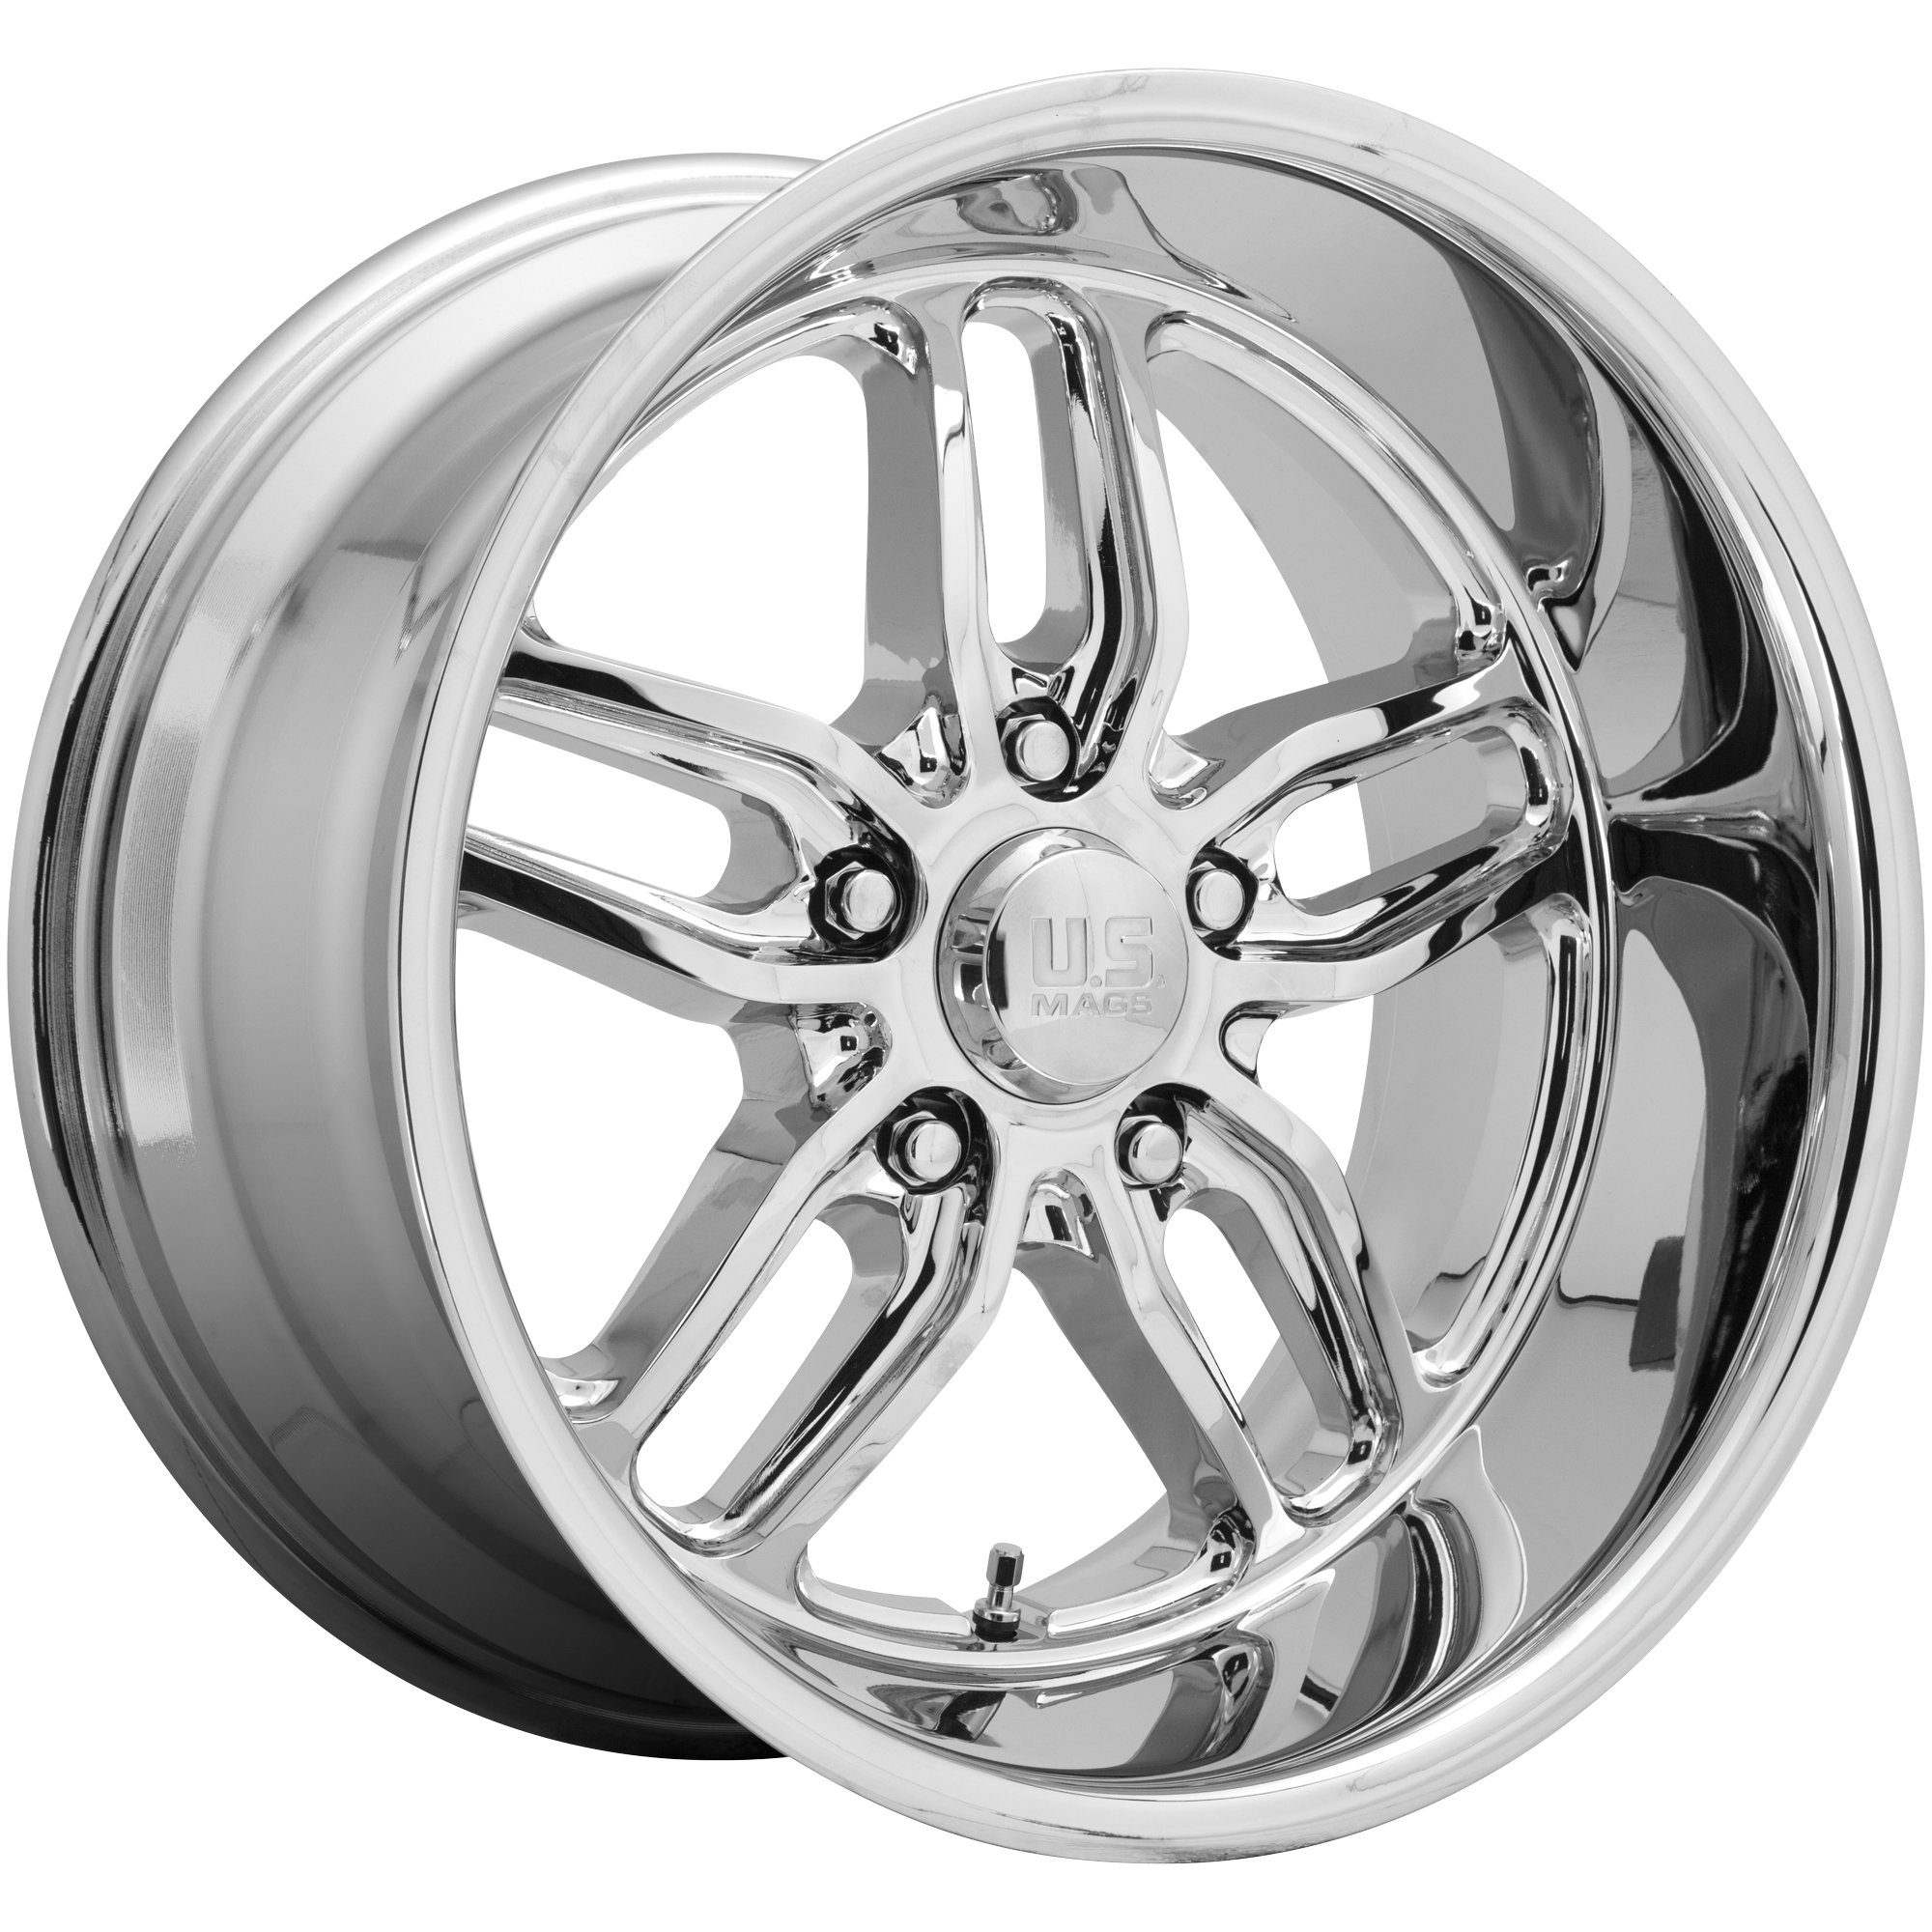 CTEN 20x10 5x120.65 CHROME PLATED (1 mm) - Tires and Engine Performance